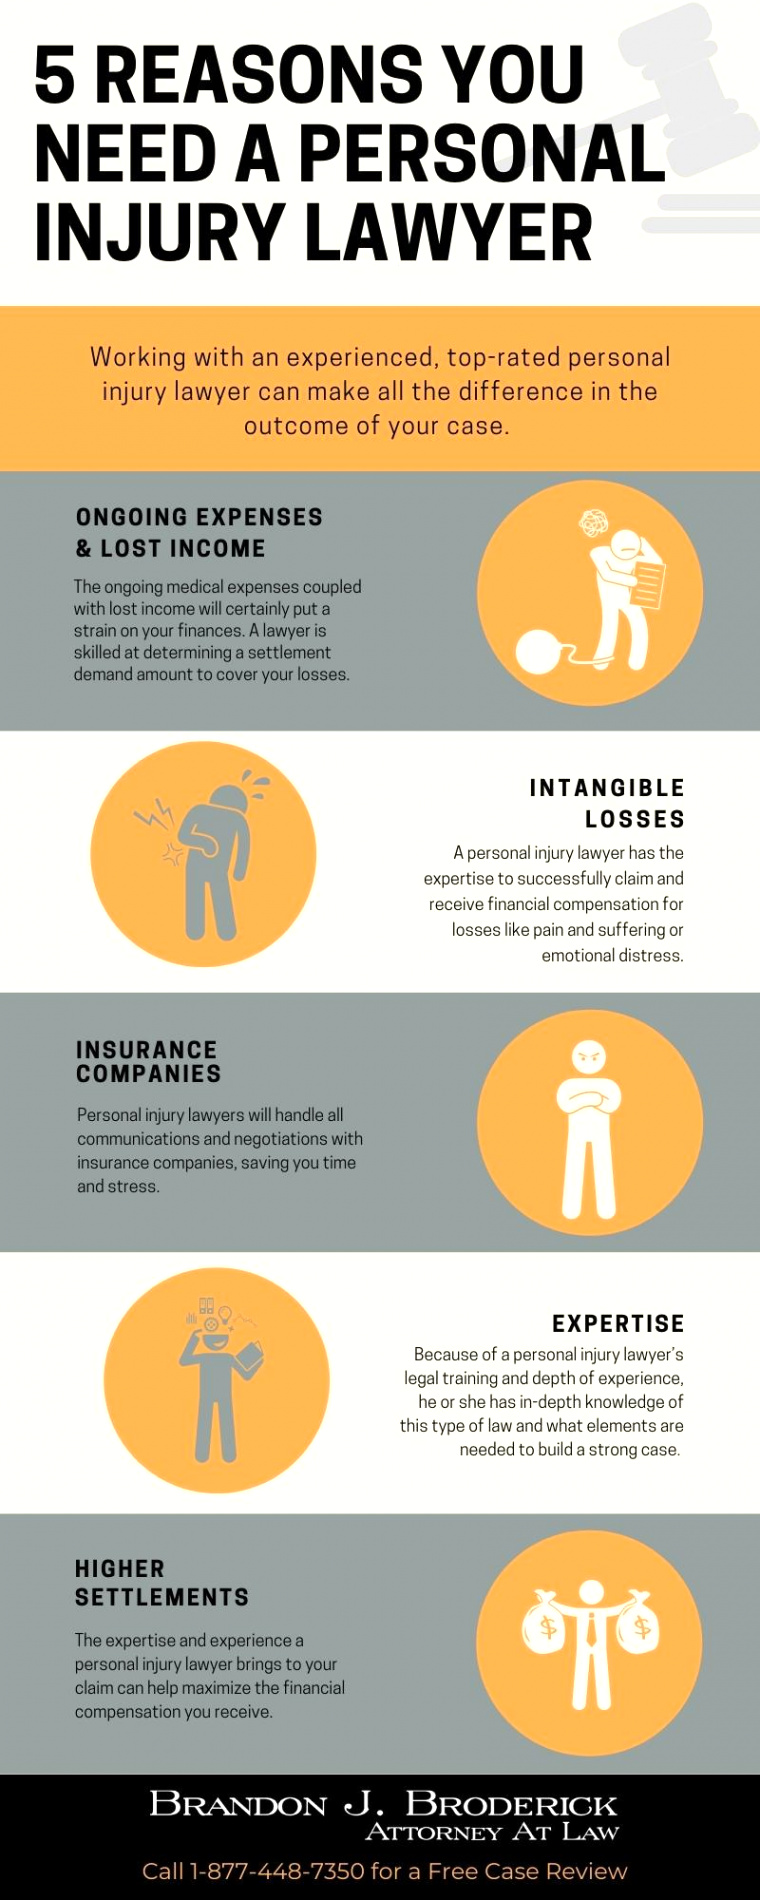 5 Reasons Why You Need Personal Injury Lawyer